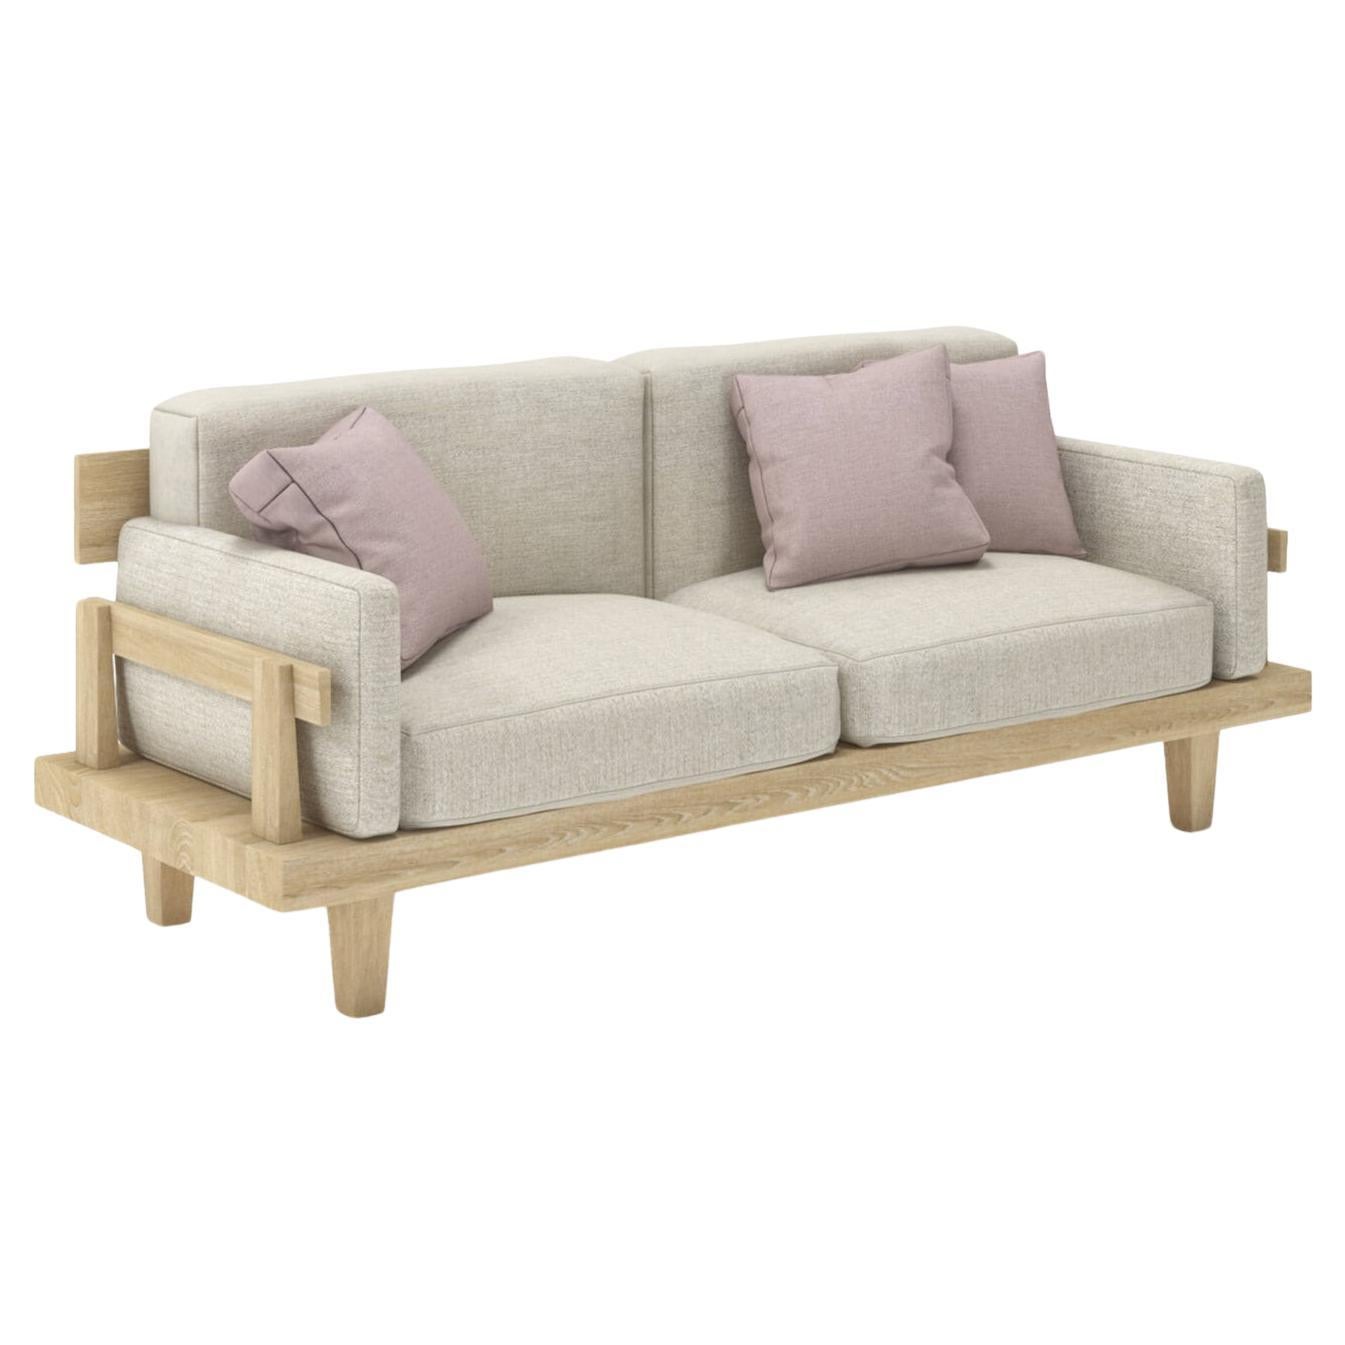 Bengalo Sofa For Sale